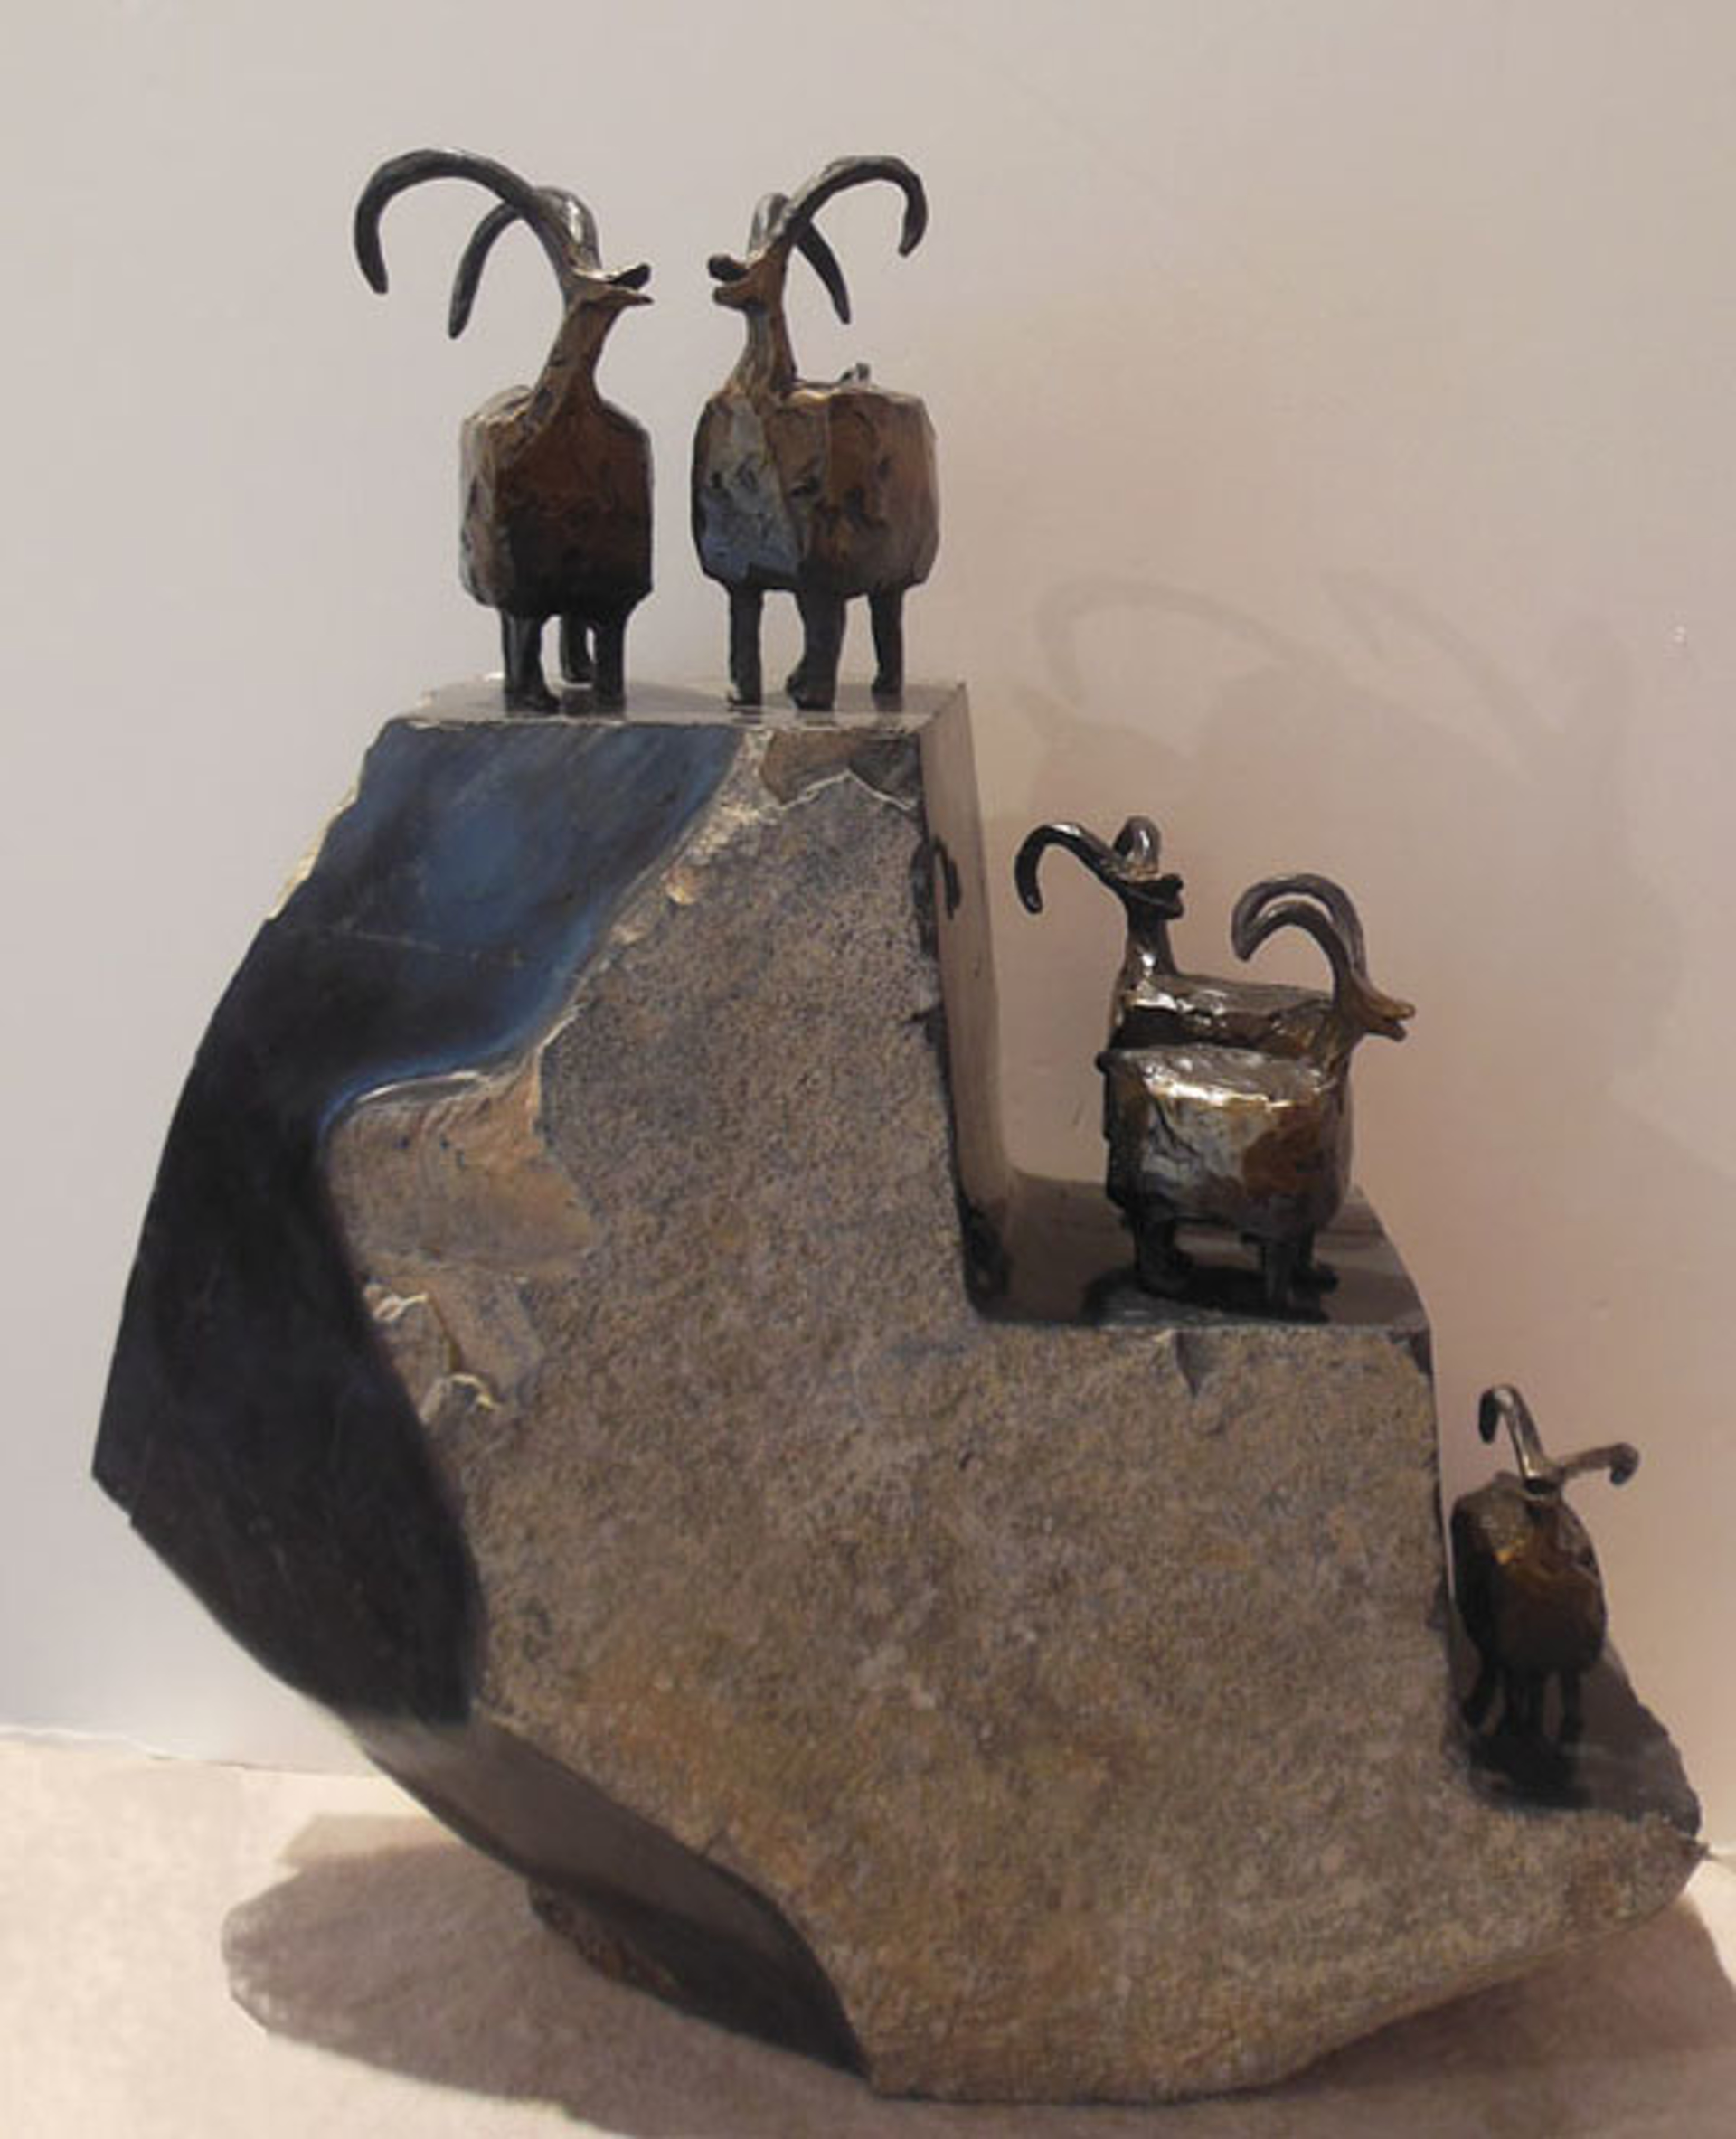 LAUGHING SHEEP - Grouping of Five for $1700   / Individual sheep:  Sm. 3" $300 - Med 4" $325 - Lg 5" $375...      Rock pedestal purchased separately. by Jill Shwaiko